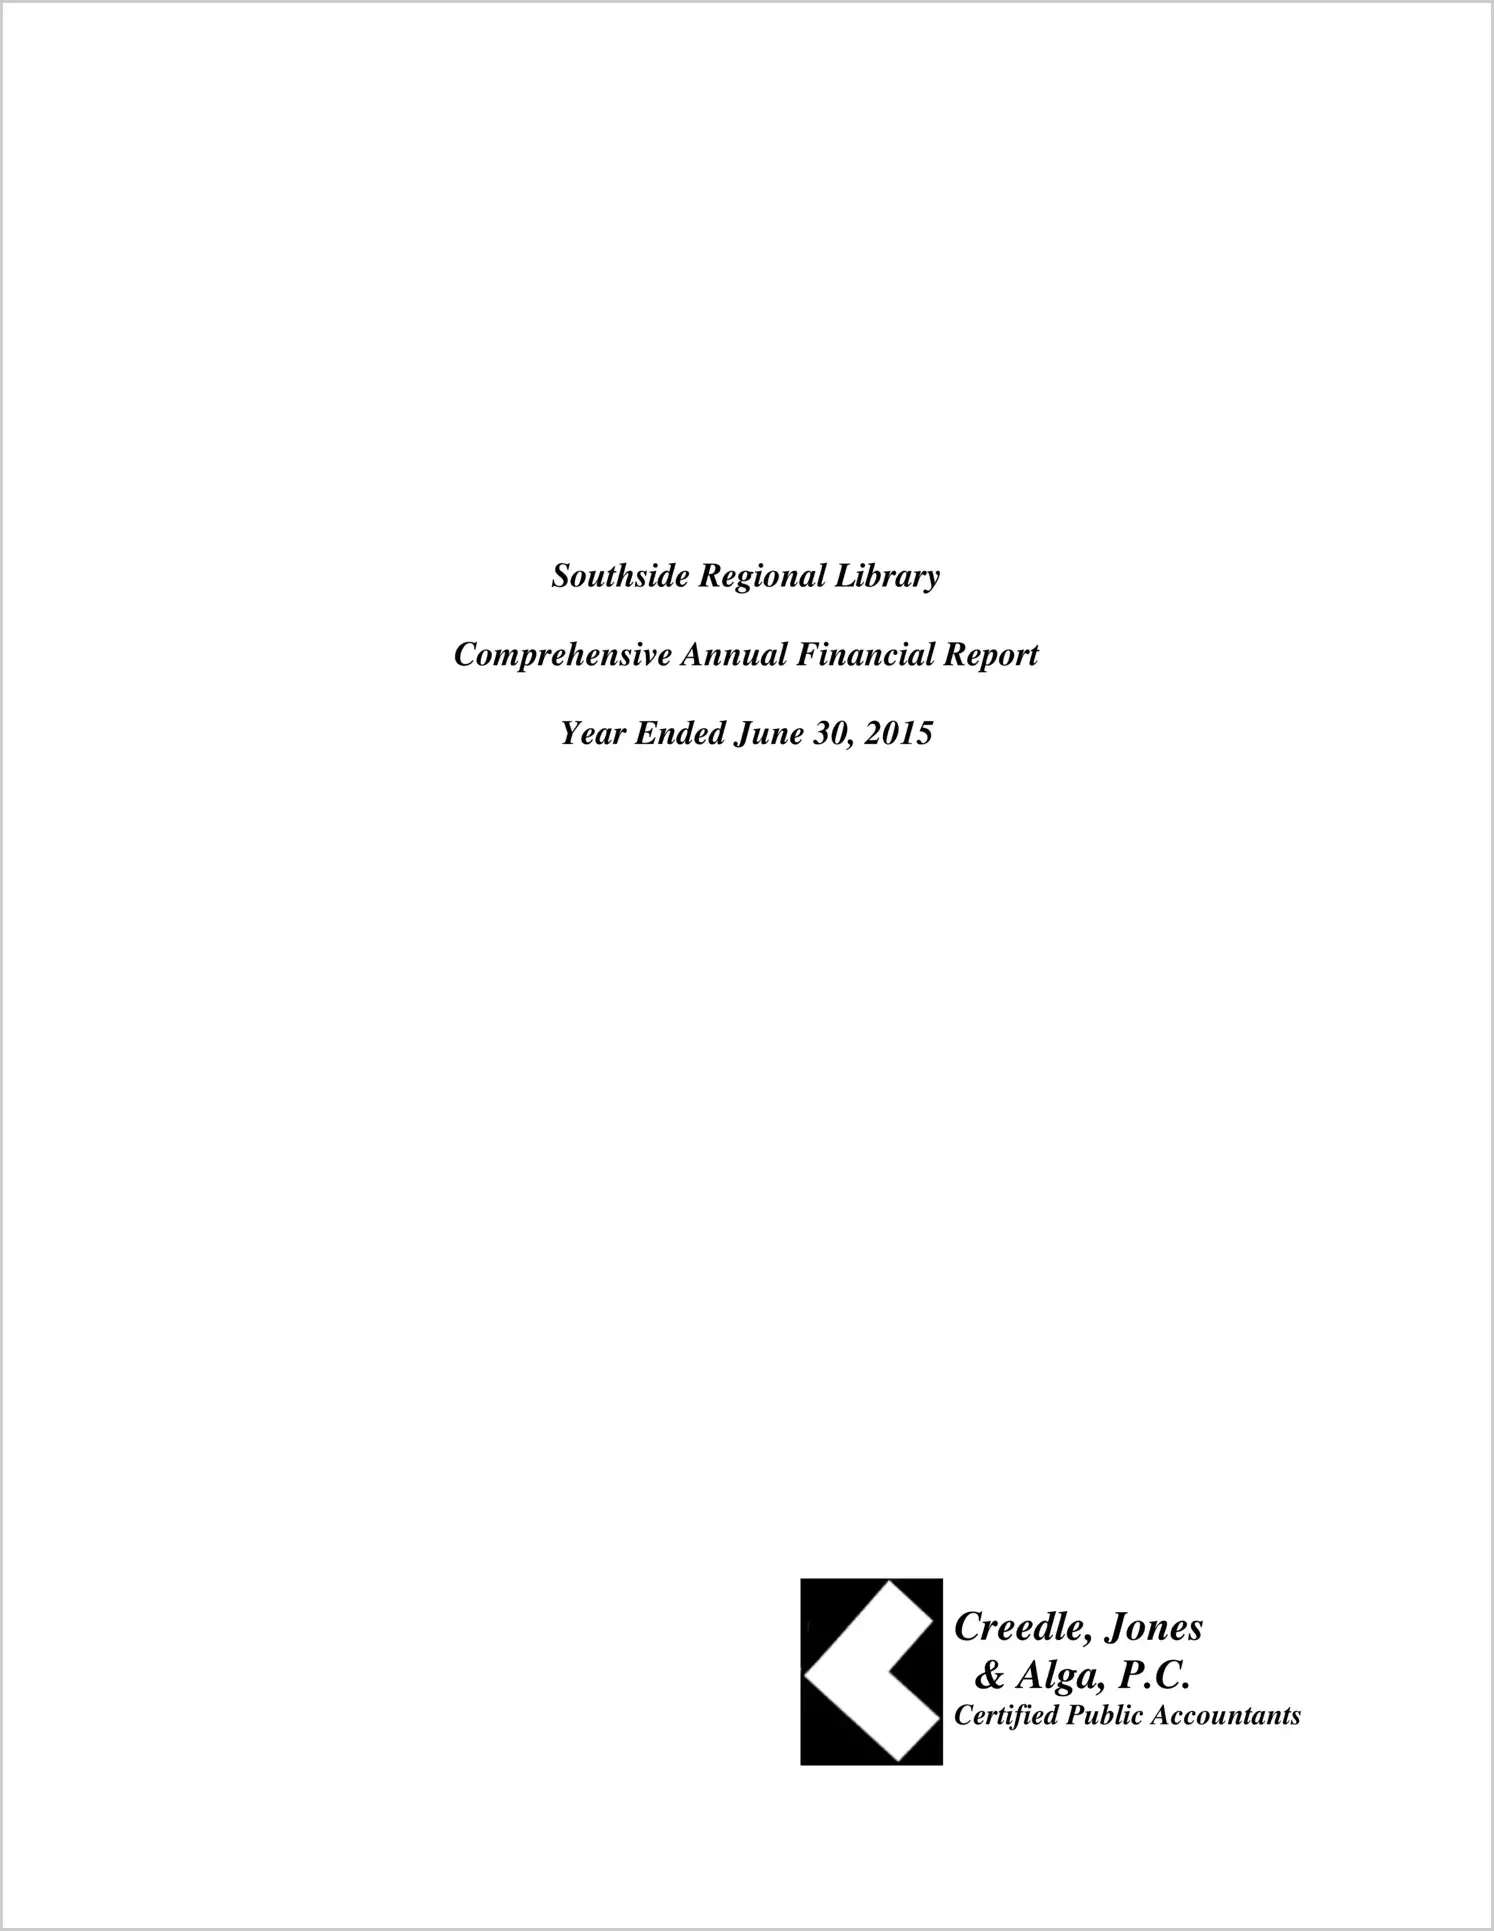 2015 ABC/Other Annual Financial Report  for Southside Regional Library